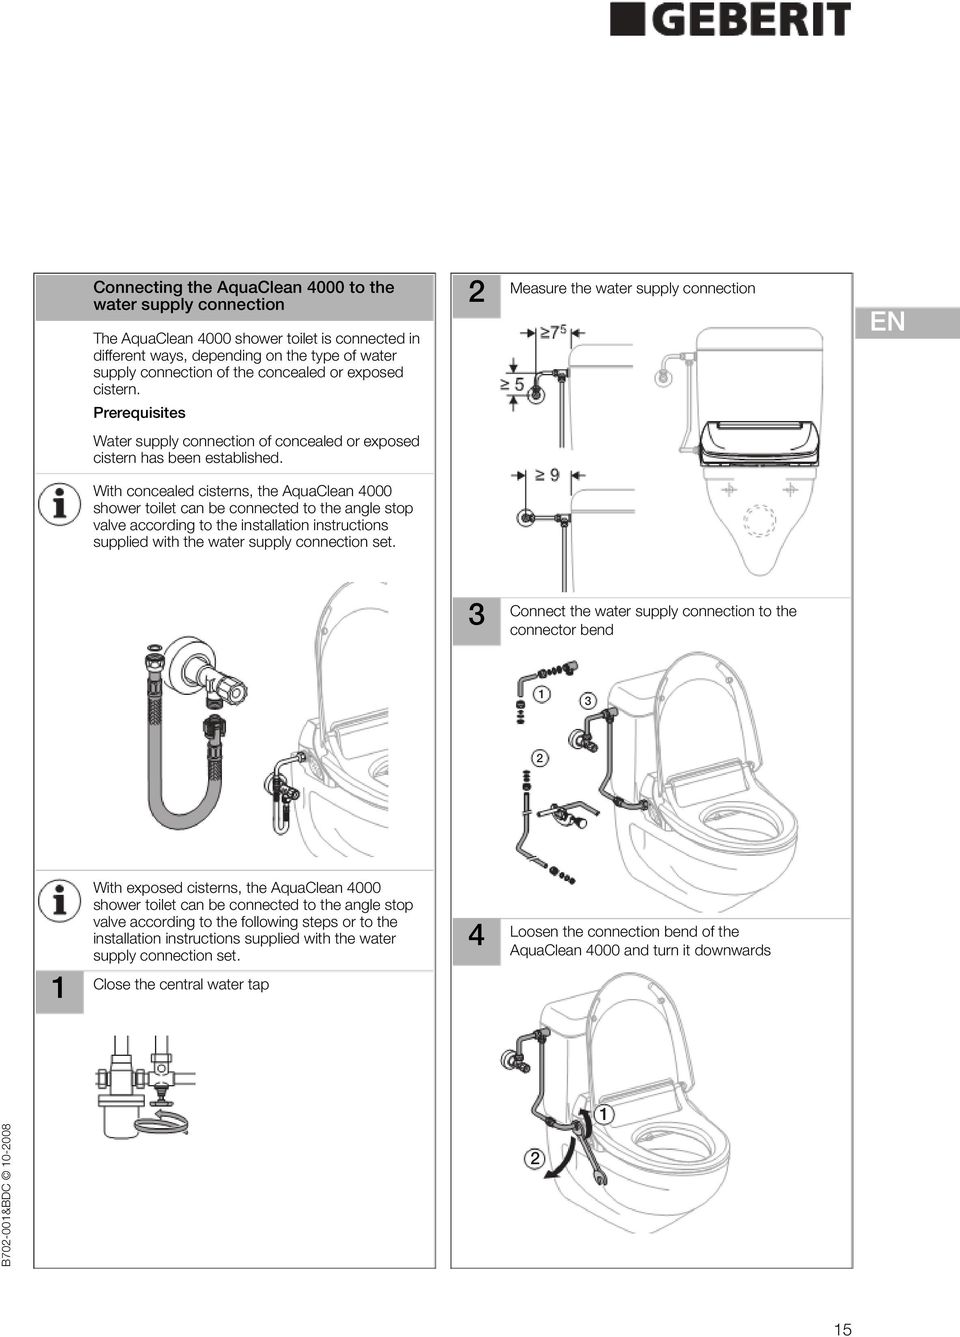 With concealed cisterns, the AquaClean 000 shower toilet can be connected to the angle stop valve according to the installation instructions supplied with the water supply connection set.